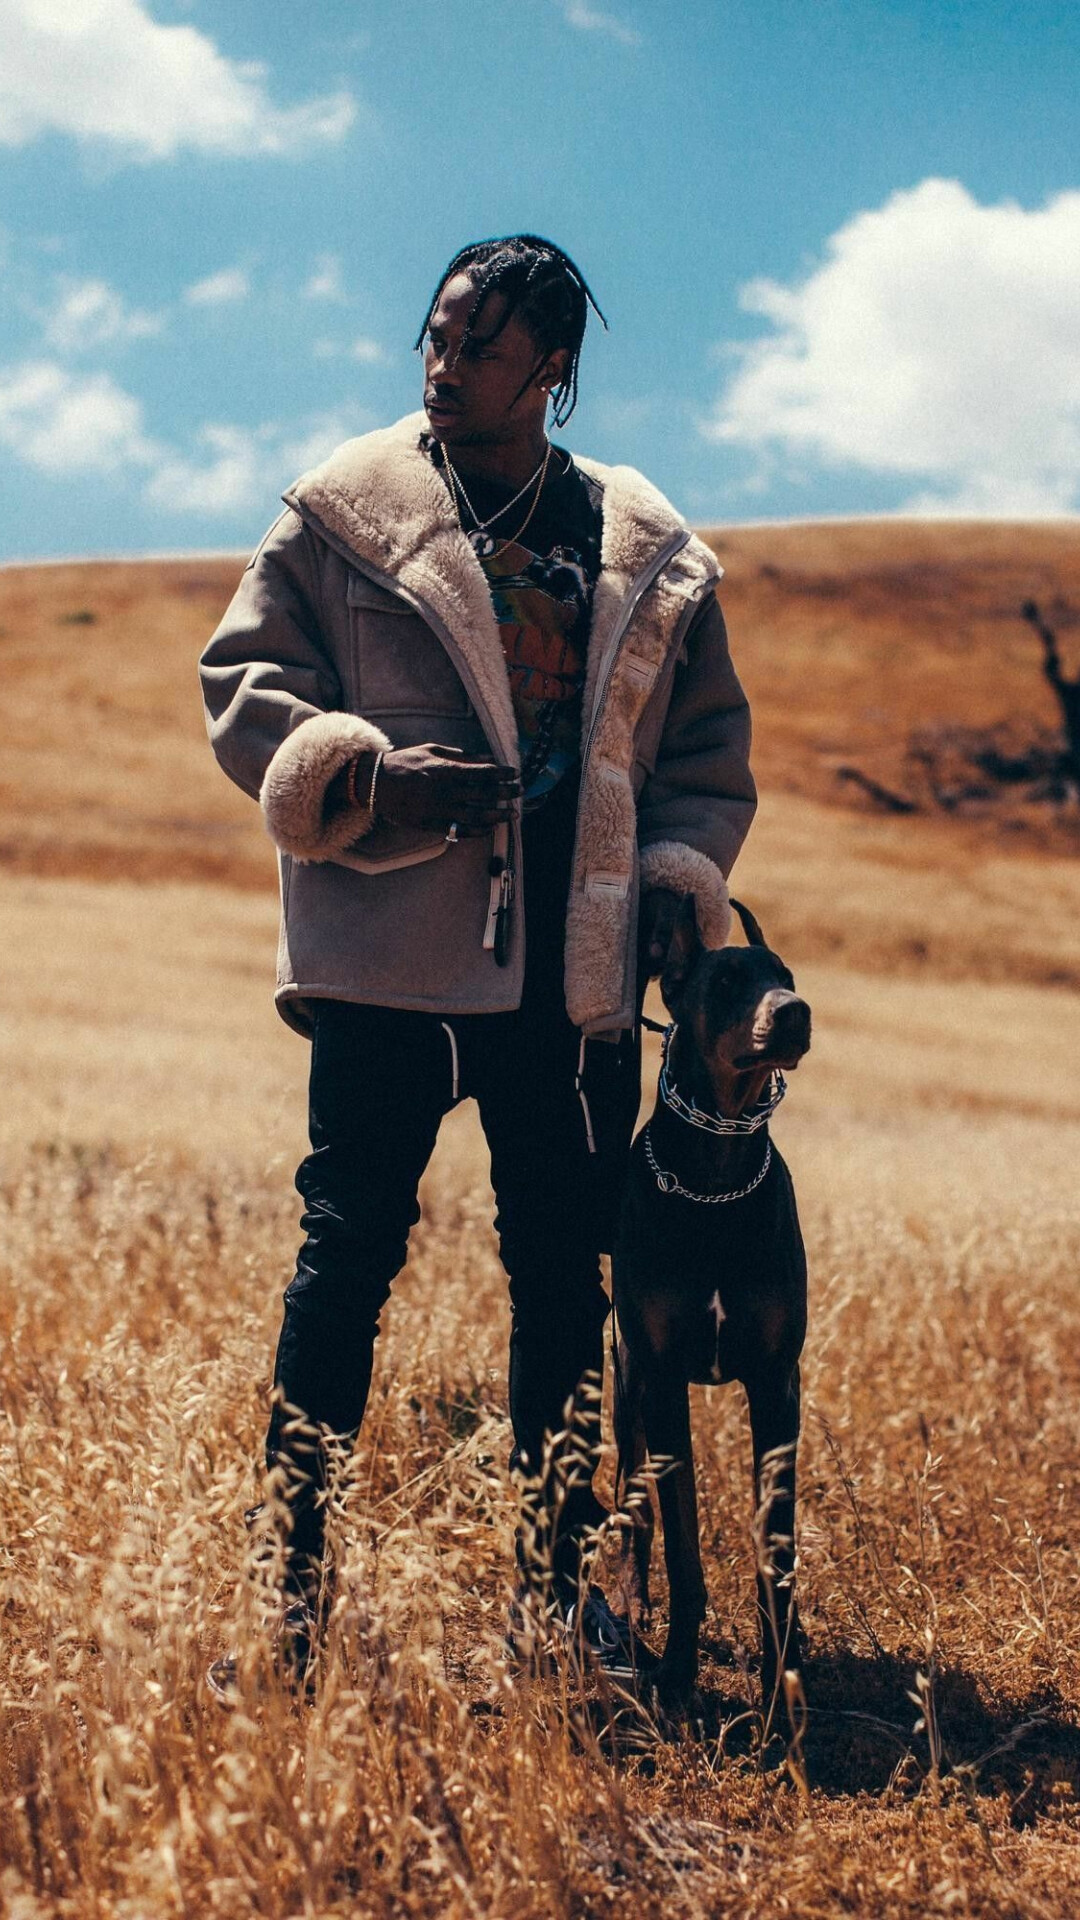 Travis Scott: An American rapper, singer, songwriter, and record producer, Nominated for eight Grammy Awards. 1080x1920 Full HD Wallpaper.